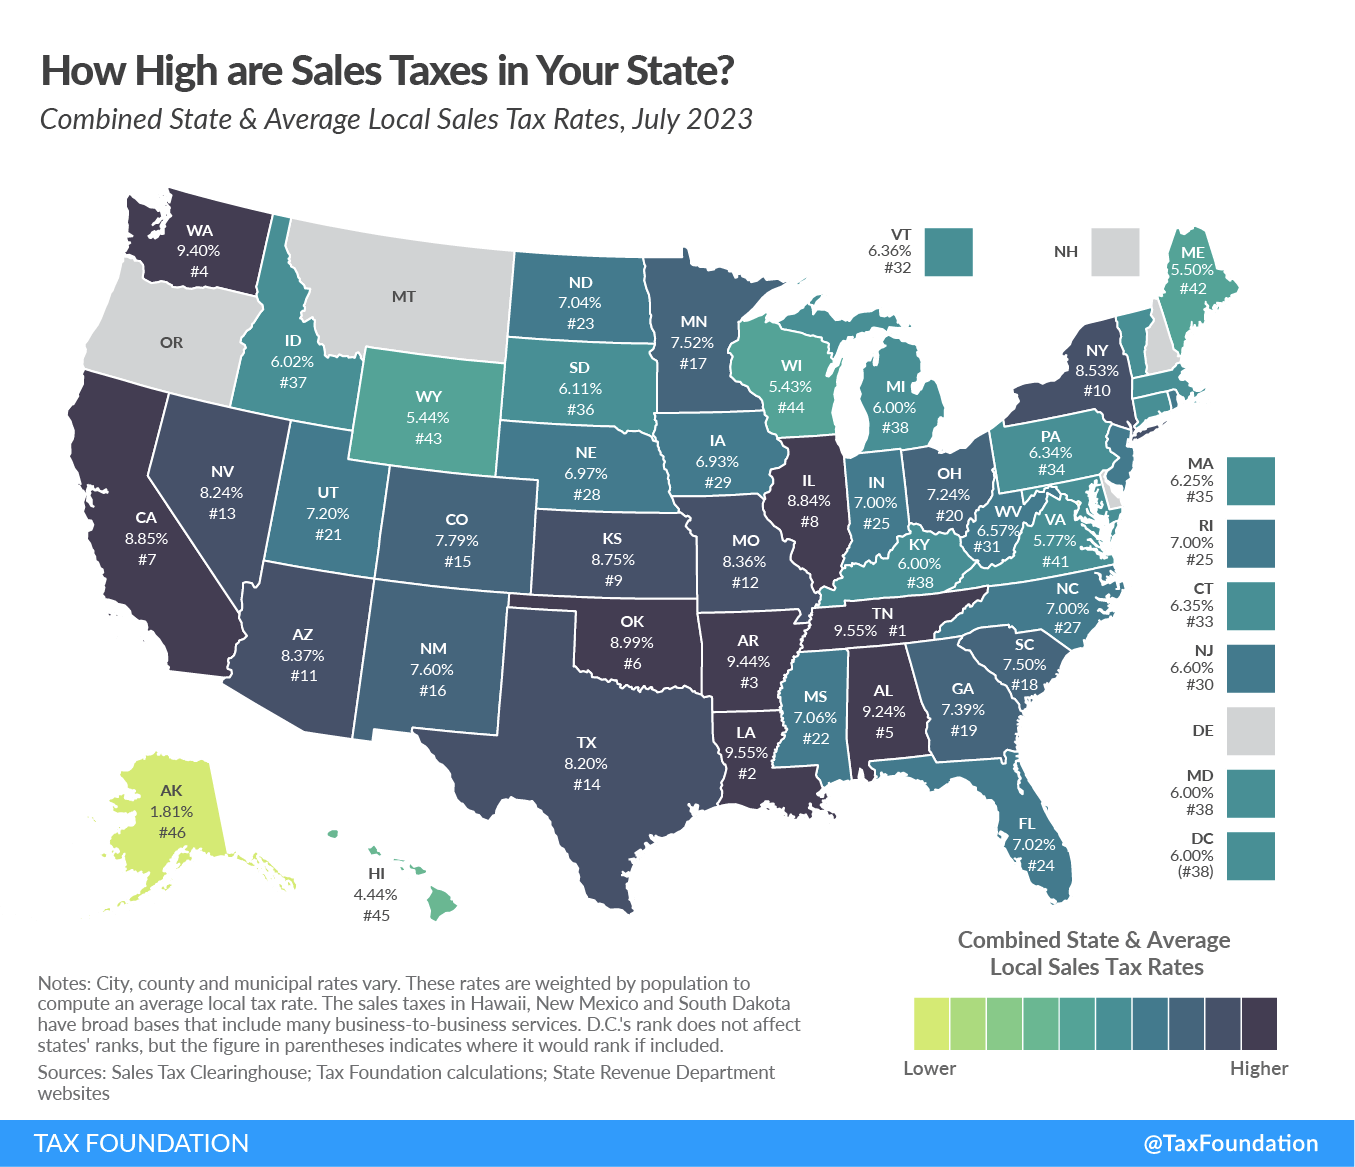 Sales tax rates by state across the United States as of July 2023.